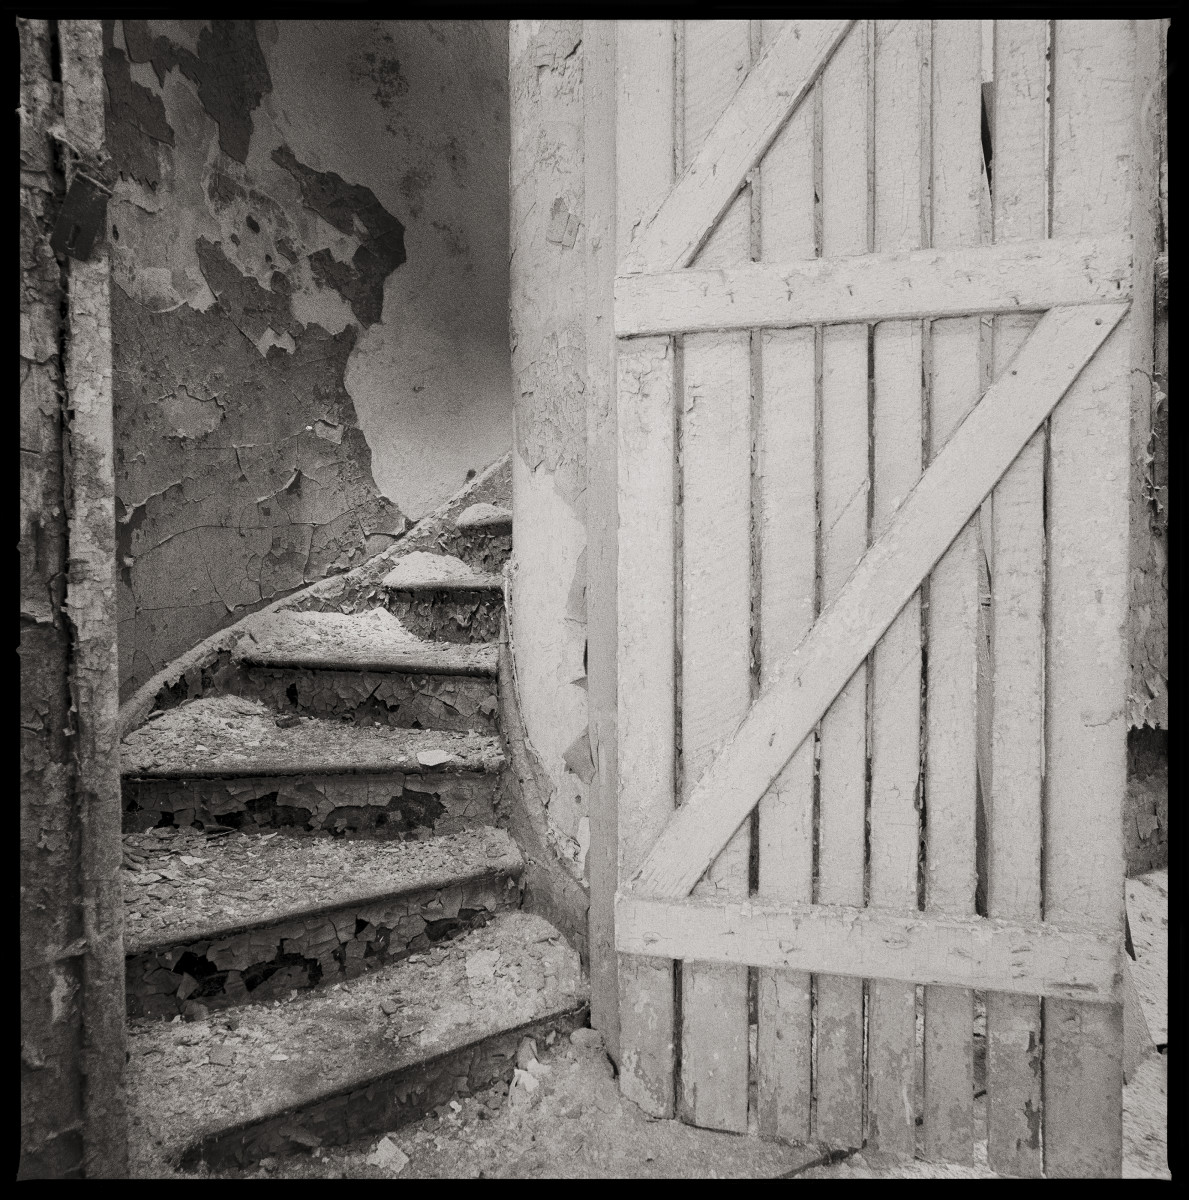 Untitled by Eric T. Kunsman  Image: ID: A black and white image shows a stairway leading upwards.  There is a wooden door to the right.  The stairs are covered in dust and debris.  